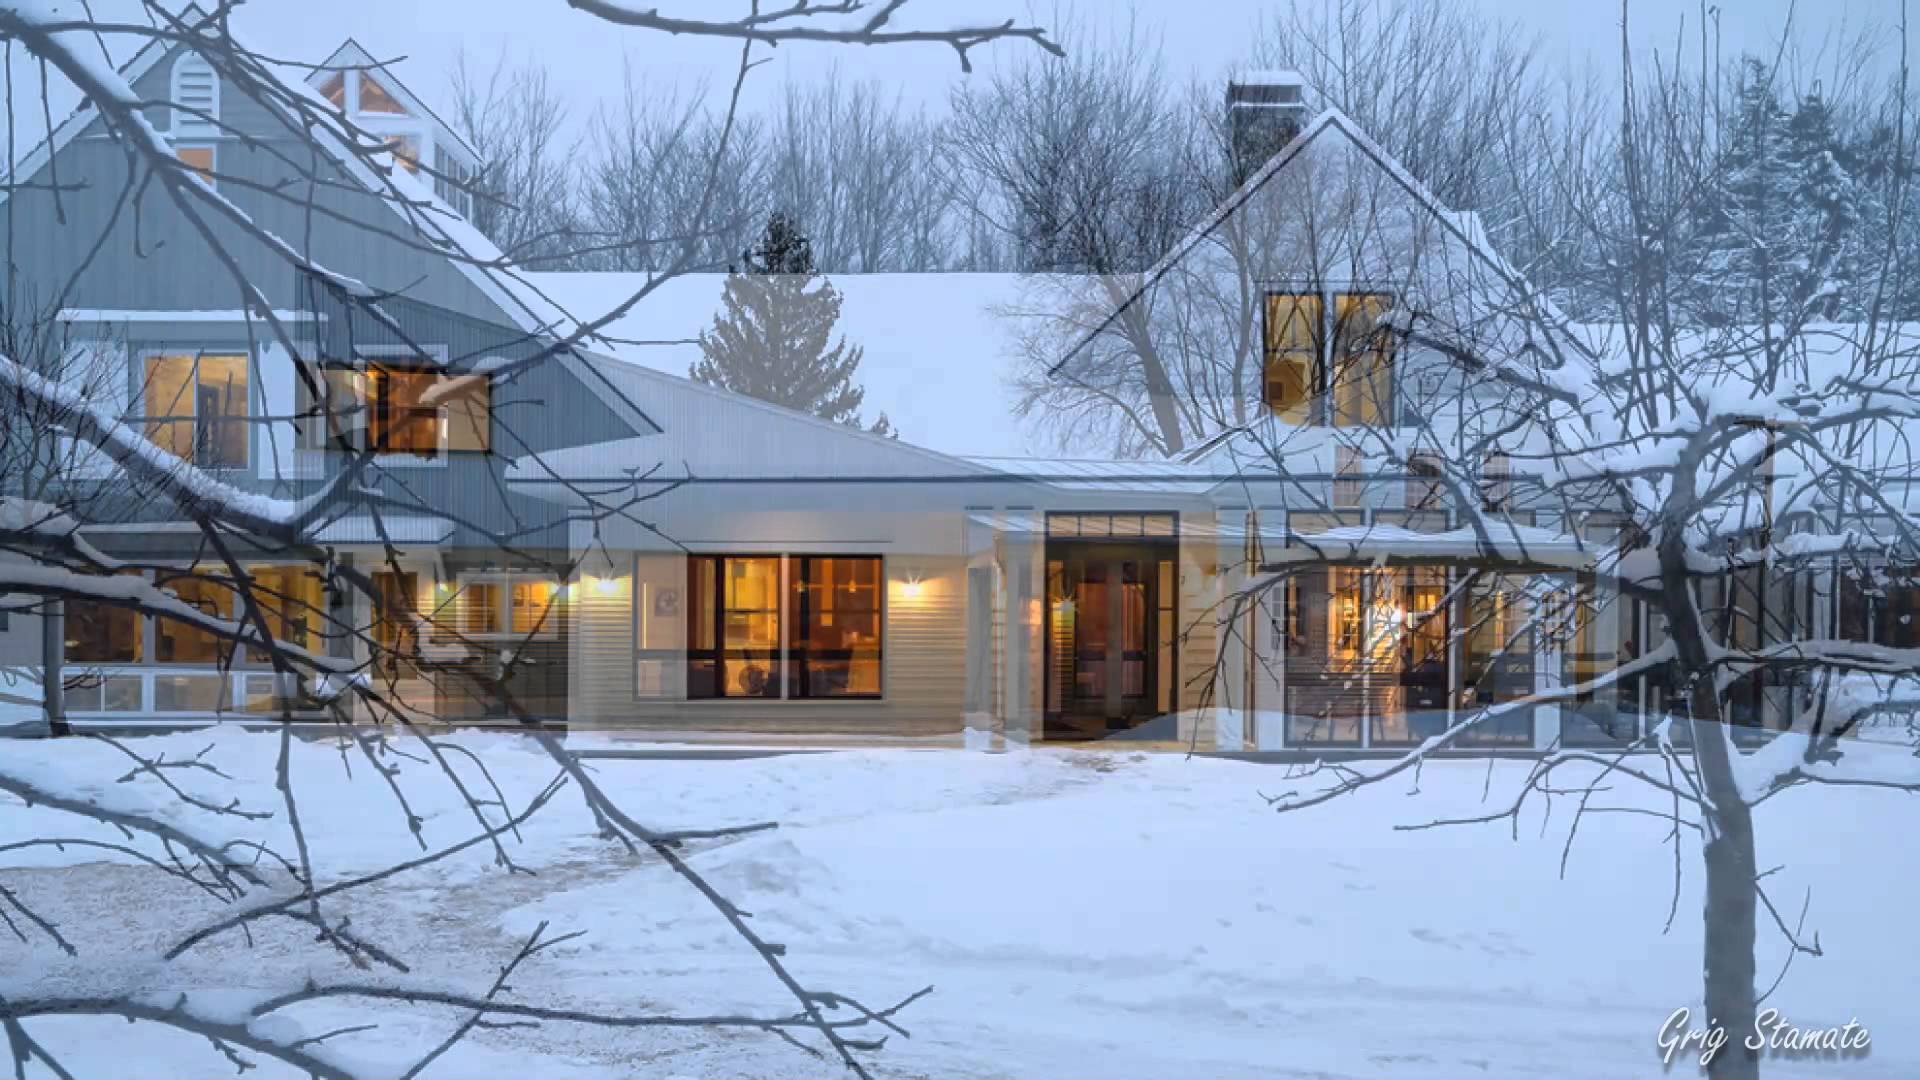 Traditional American Farmhouses in Winter - YouTube